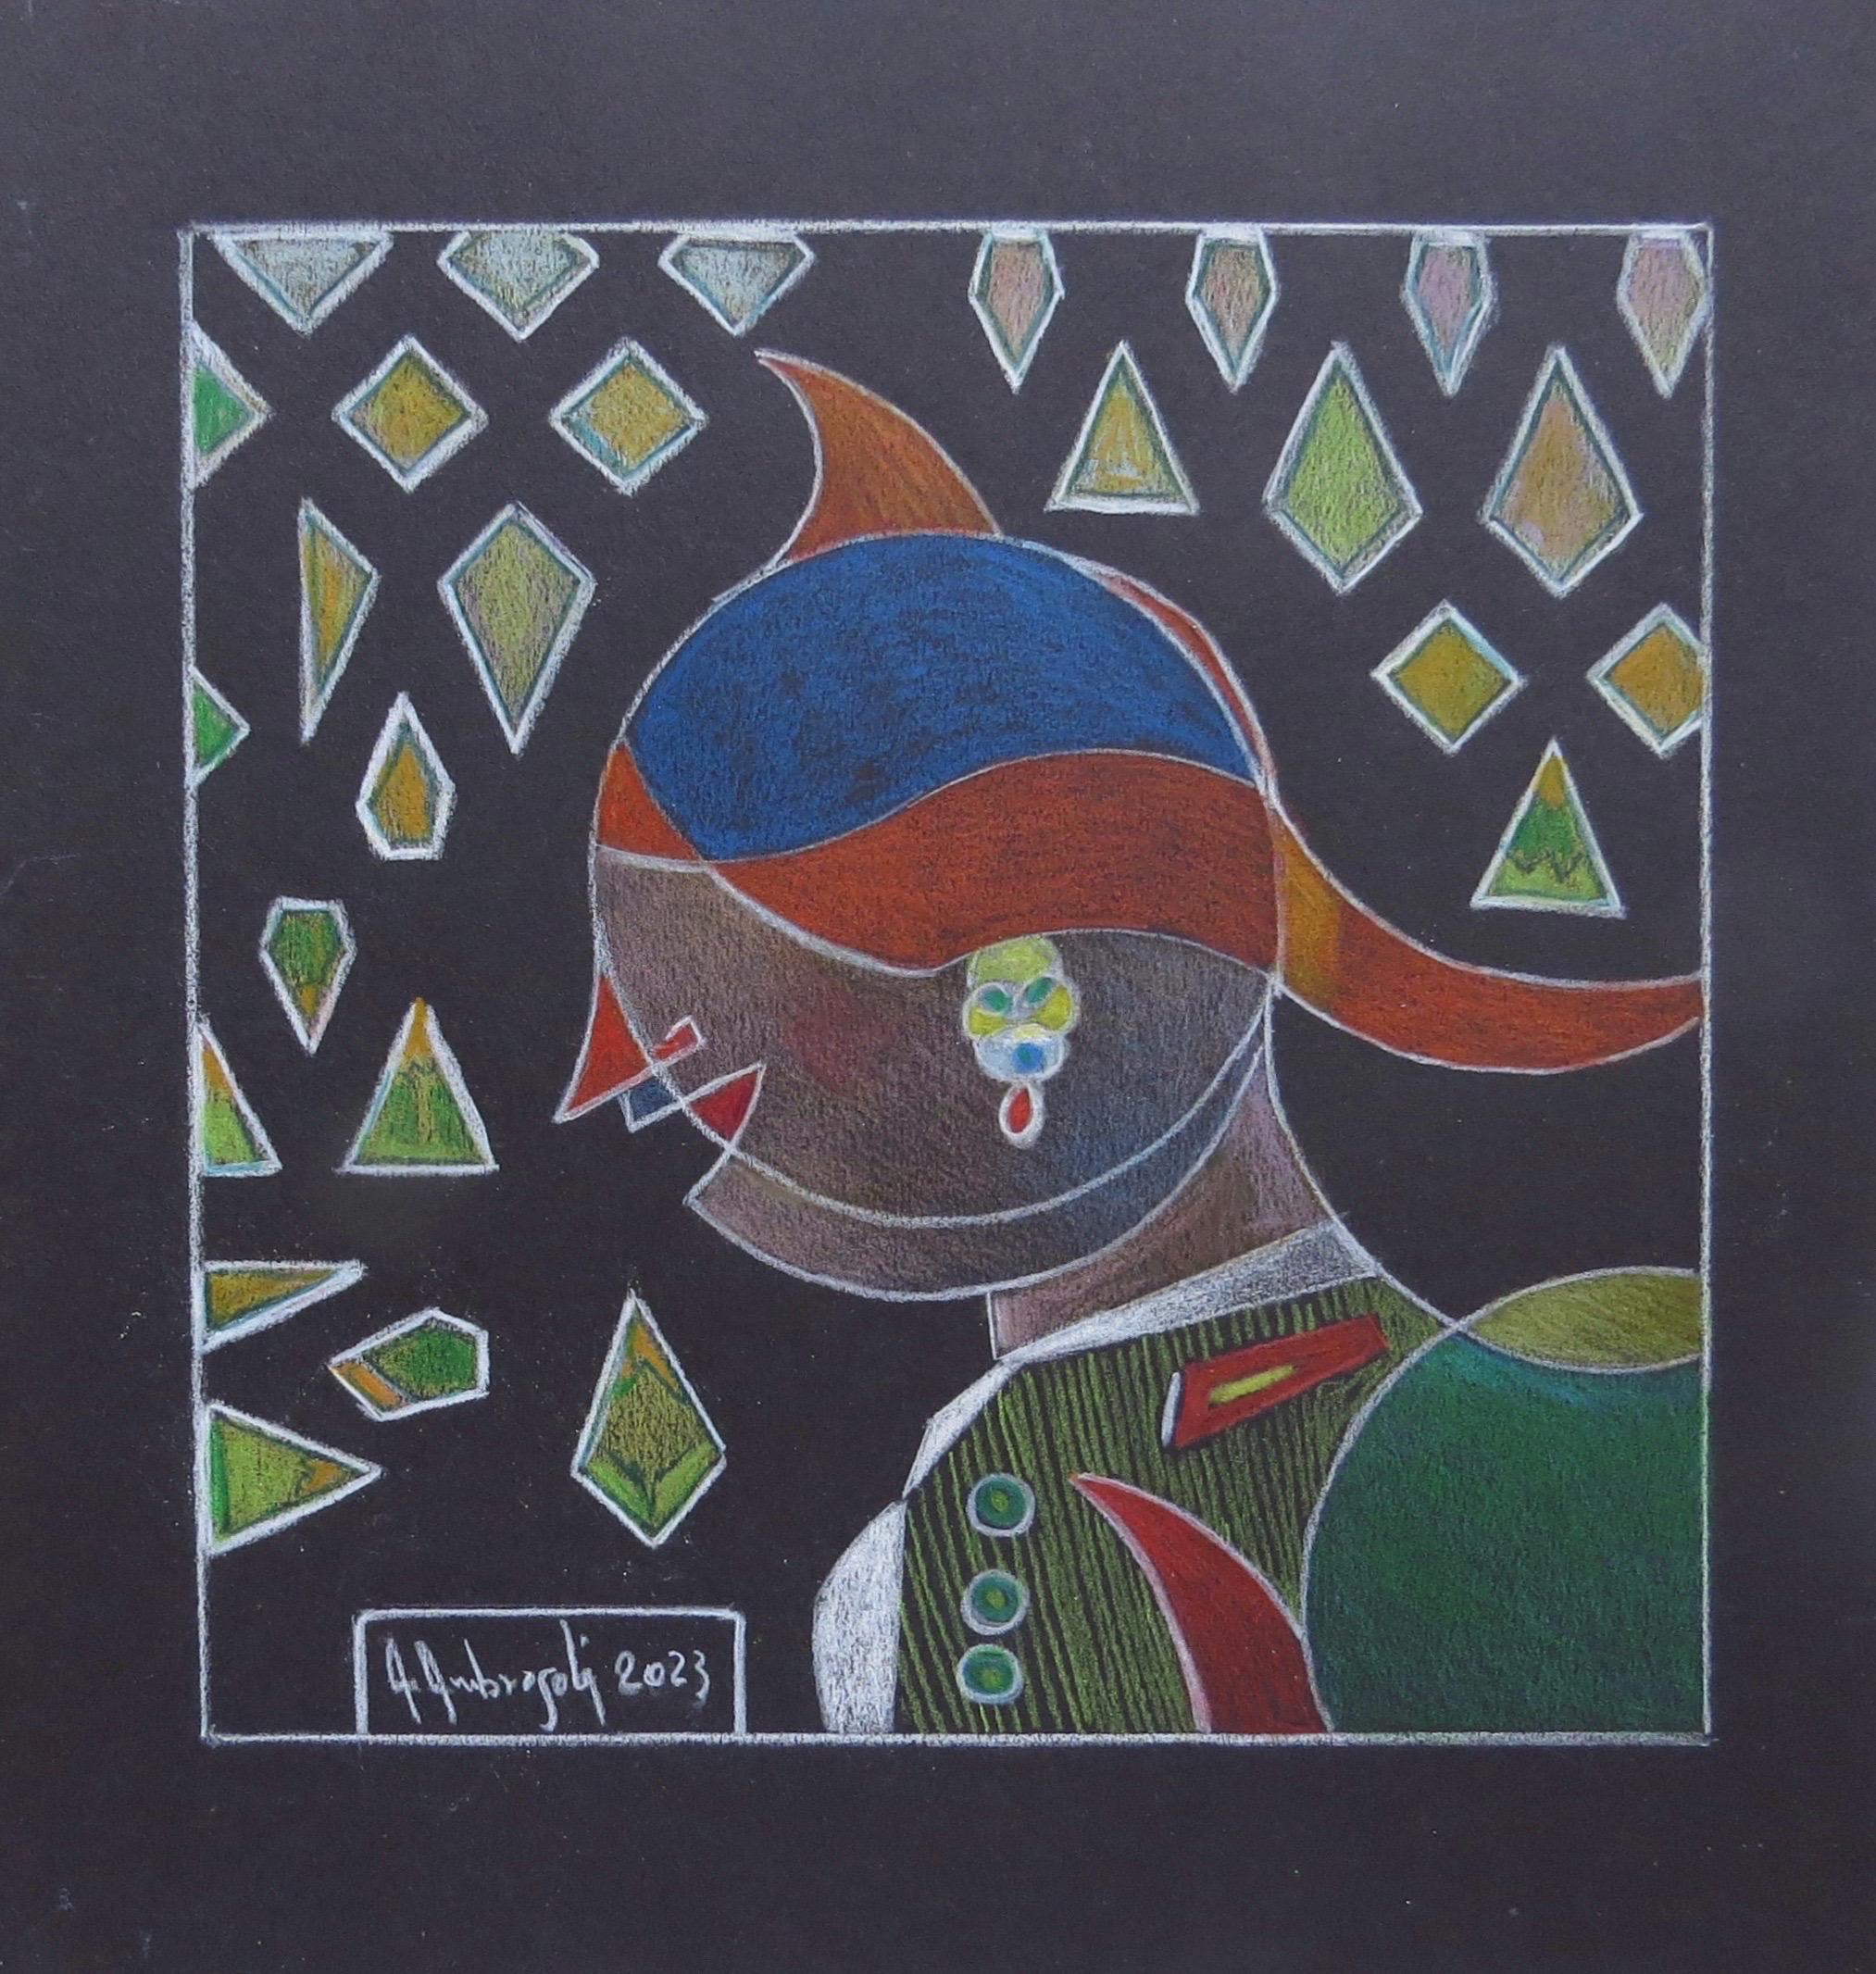 Reminiscence (2023) cm 21x21, by Italian artist Annemarie Ambrosoli, is a colored drawing with color pencil on a black cardboard, that measures 29x26,5 cm.
This work is a one-of-a-kind piece. It is unframed. Hand-signed by the artist in the lower